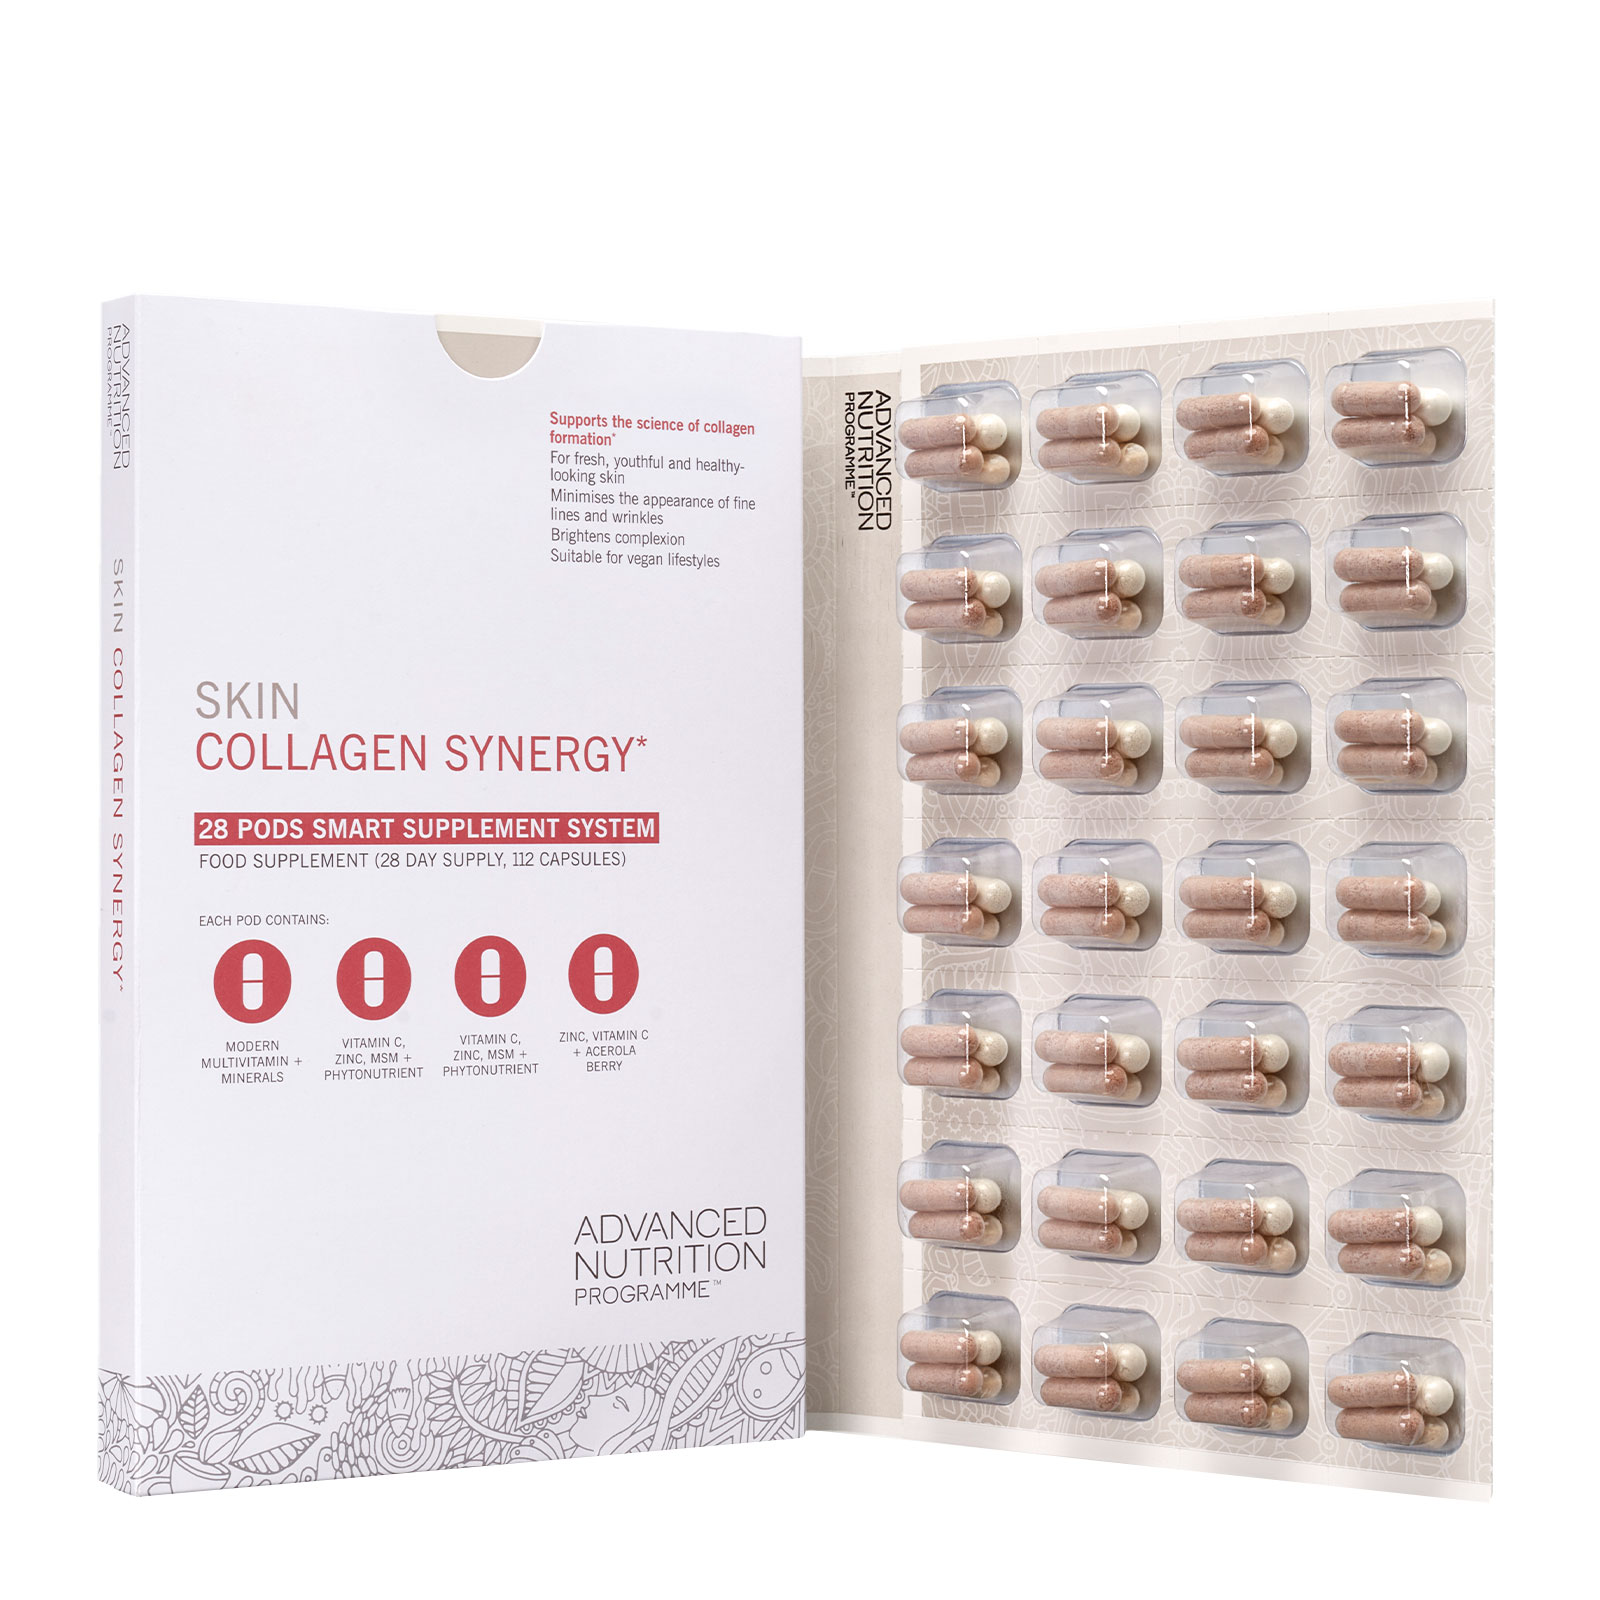 Advanced Nutrition Programme Skin Collagen Synergy X 112 Capsules